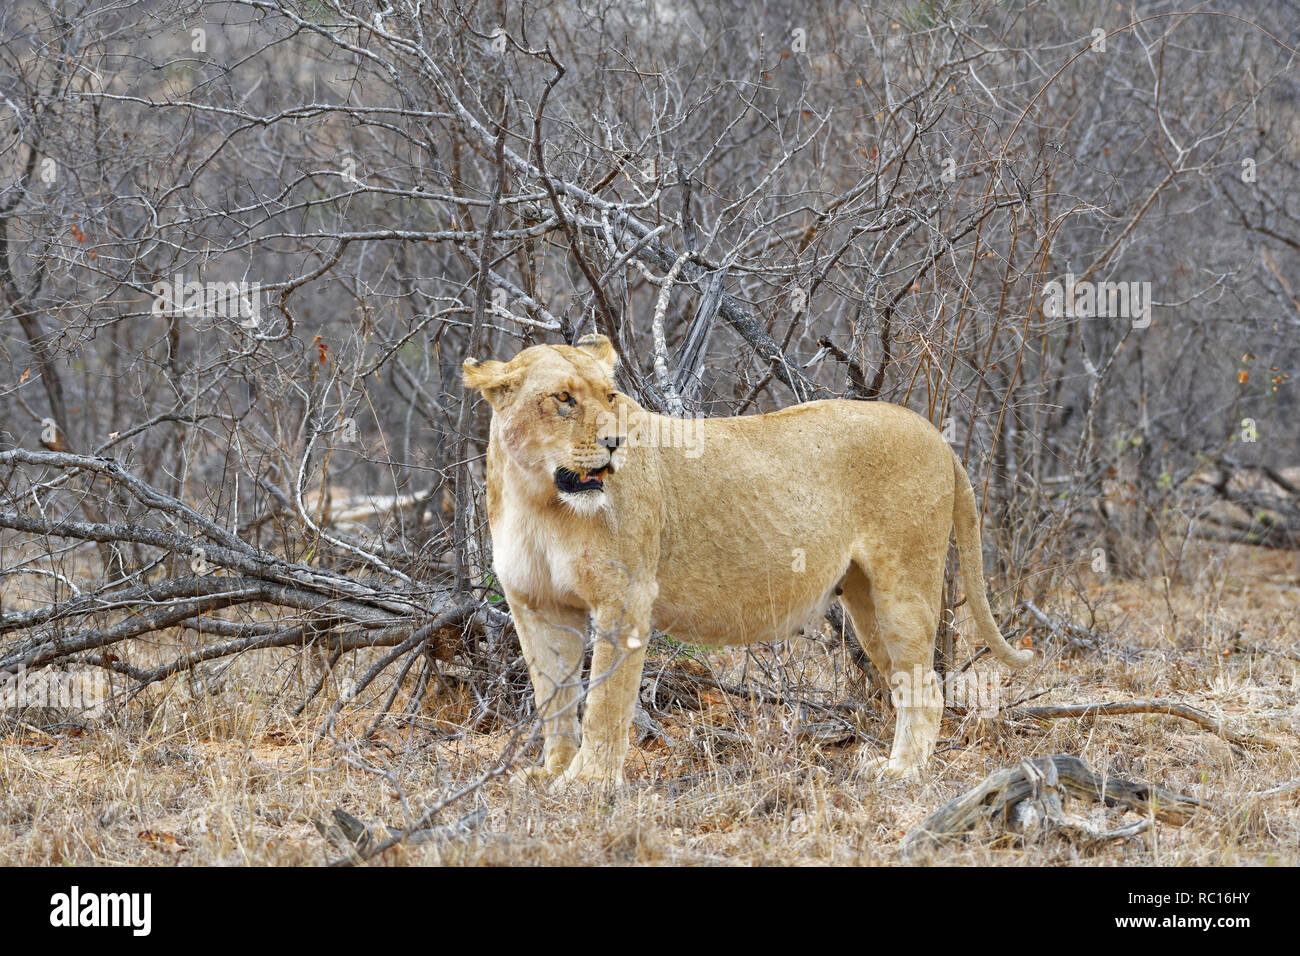 African lioness (Panthera leo), adult female, standing among shrubs, alert, Kruger National Park, South Africa, Africa Stock Photo